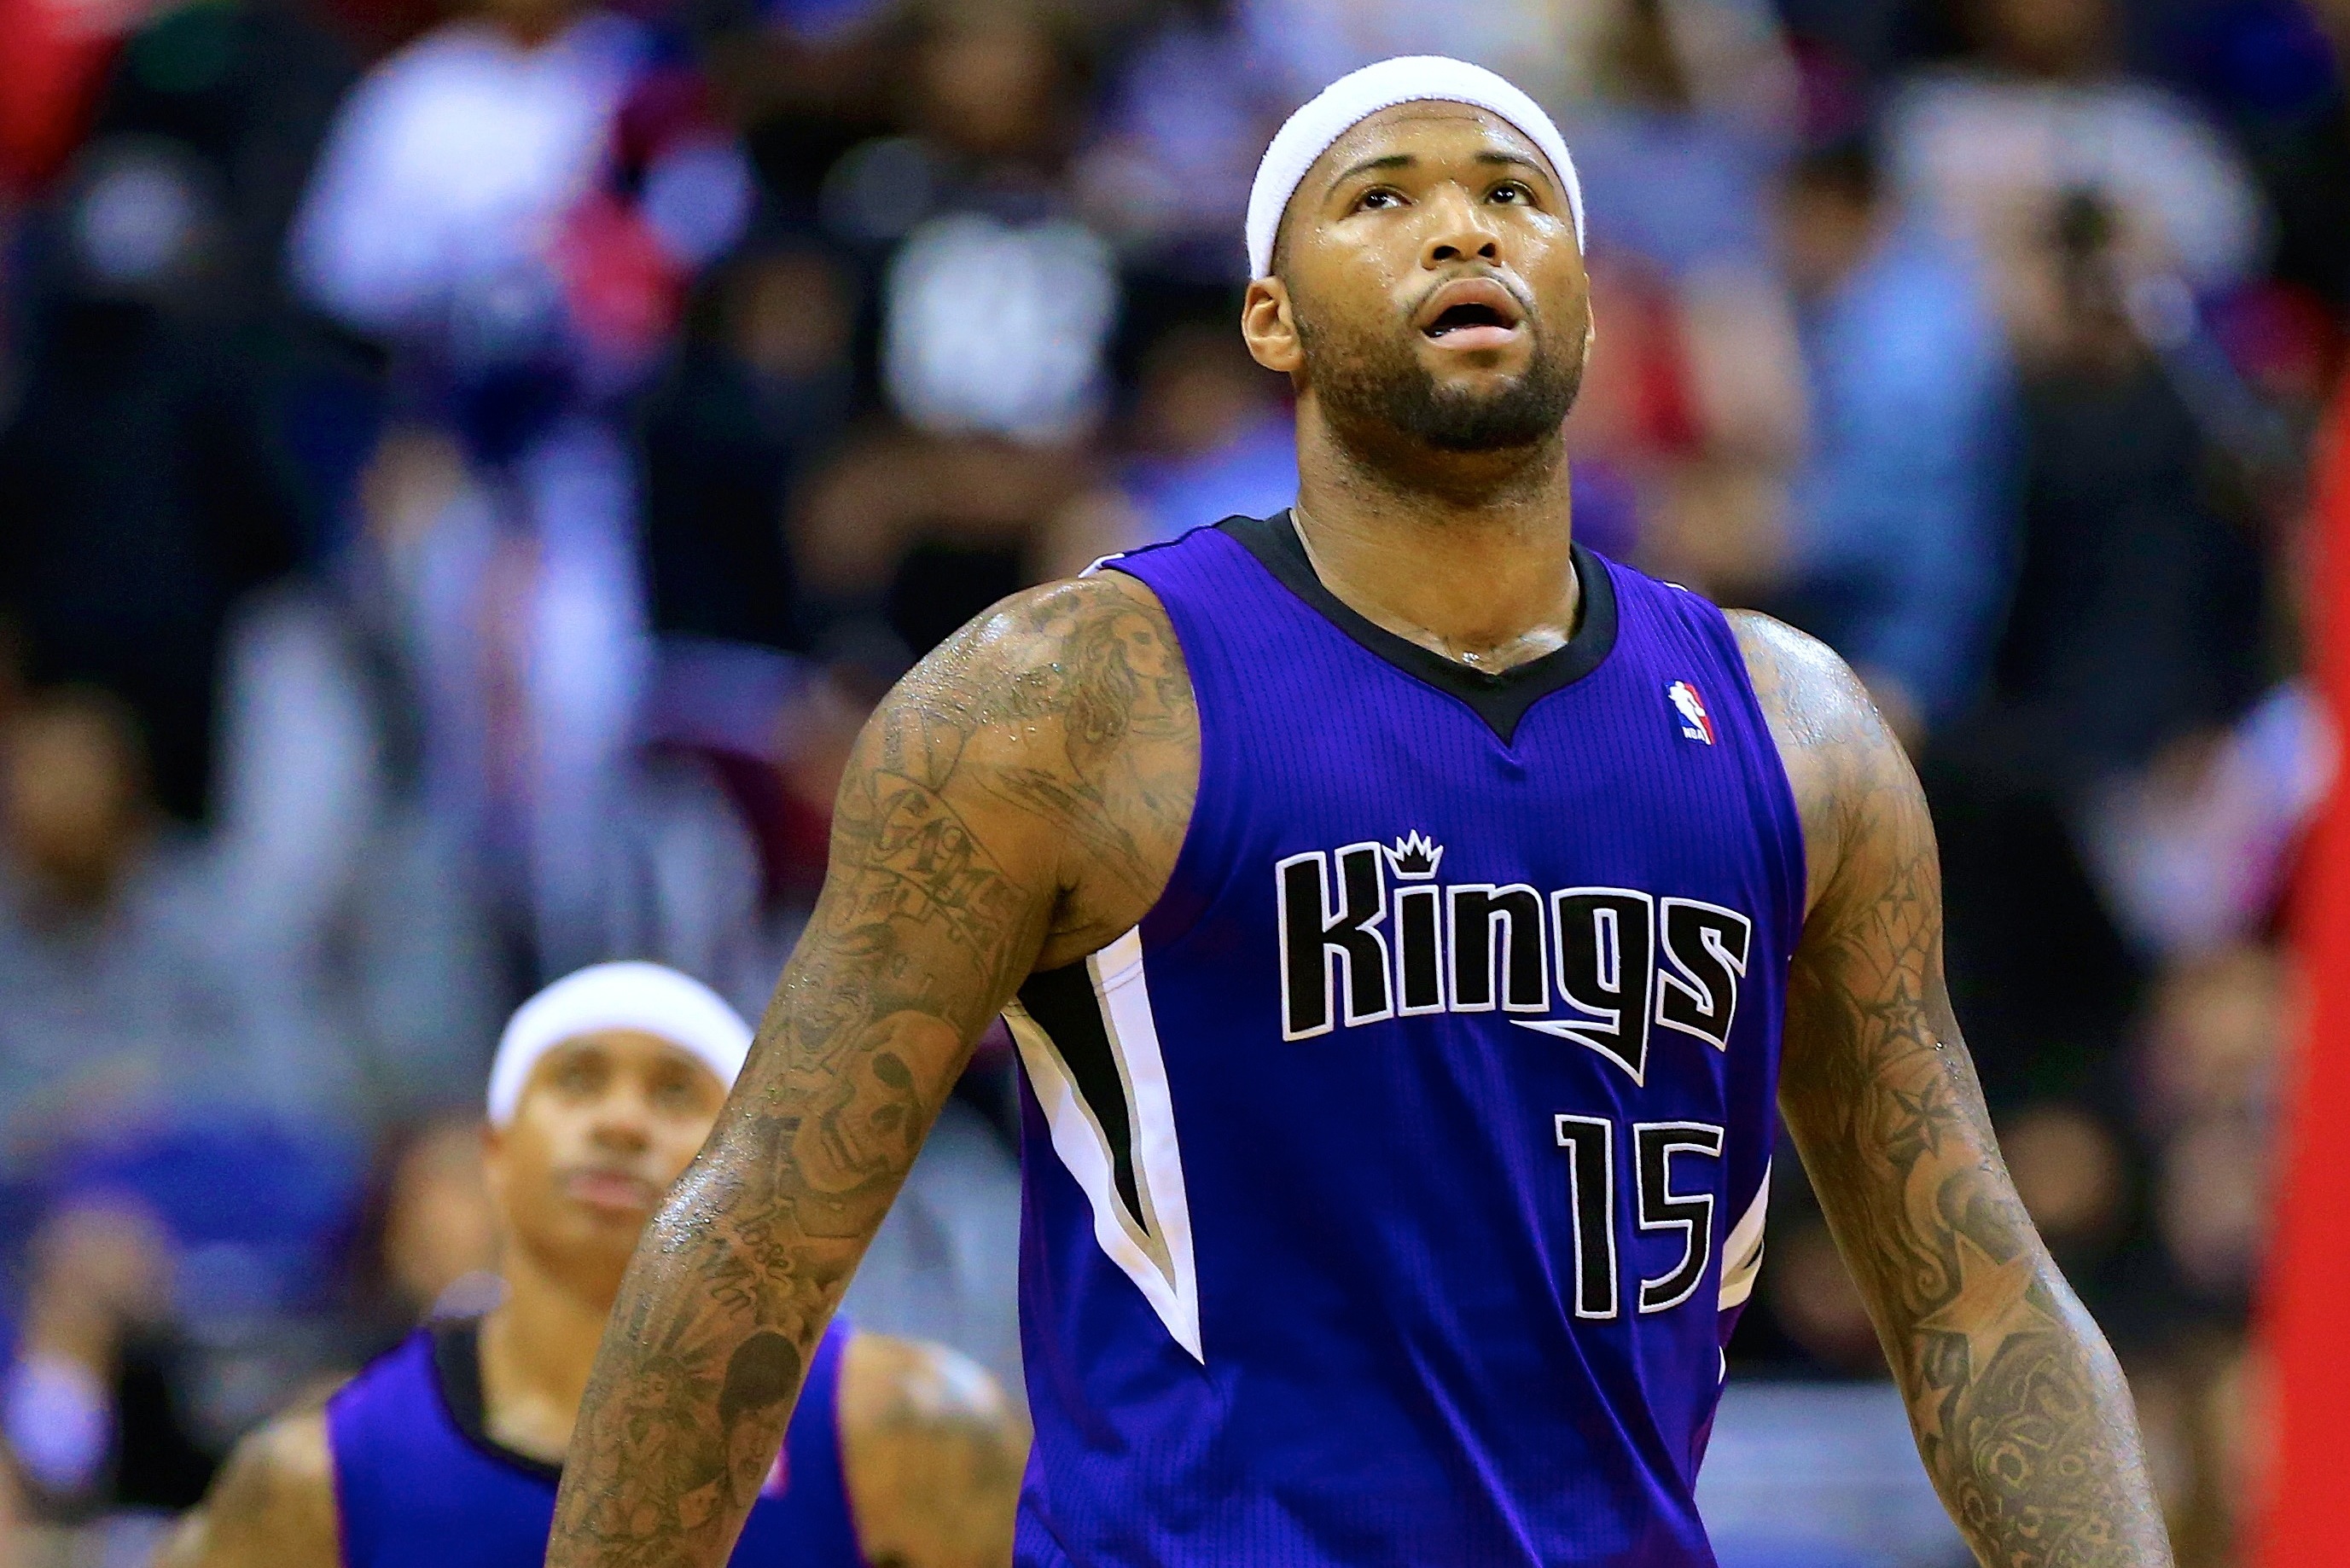 The Real Cost Of Bad Behavior: DeMarcus Cousins' $20 Million Loss